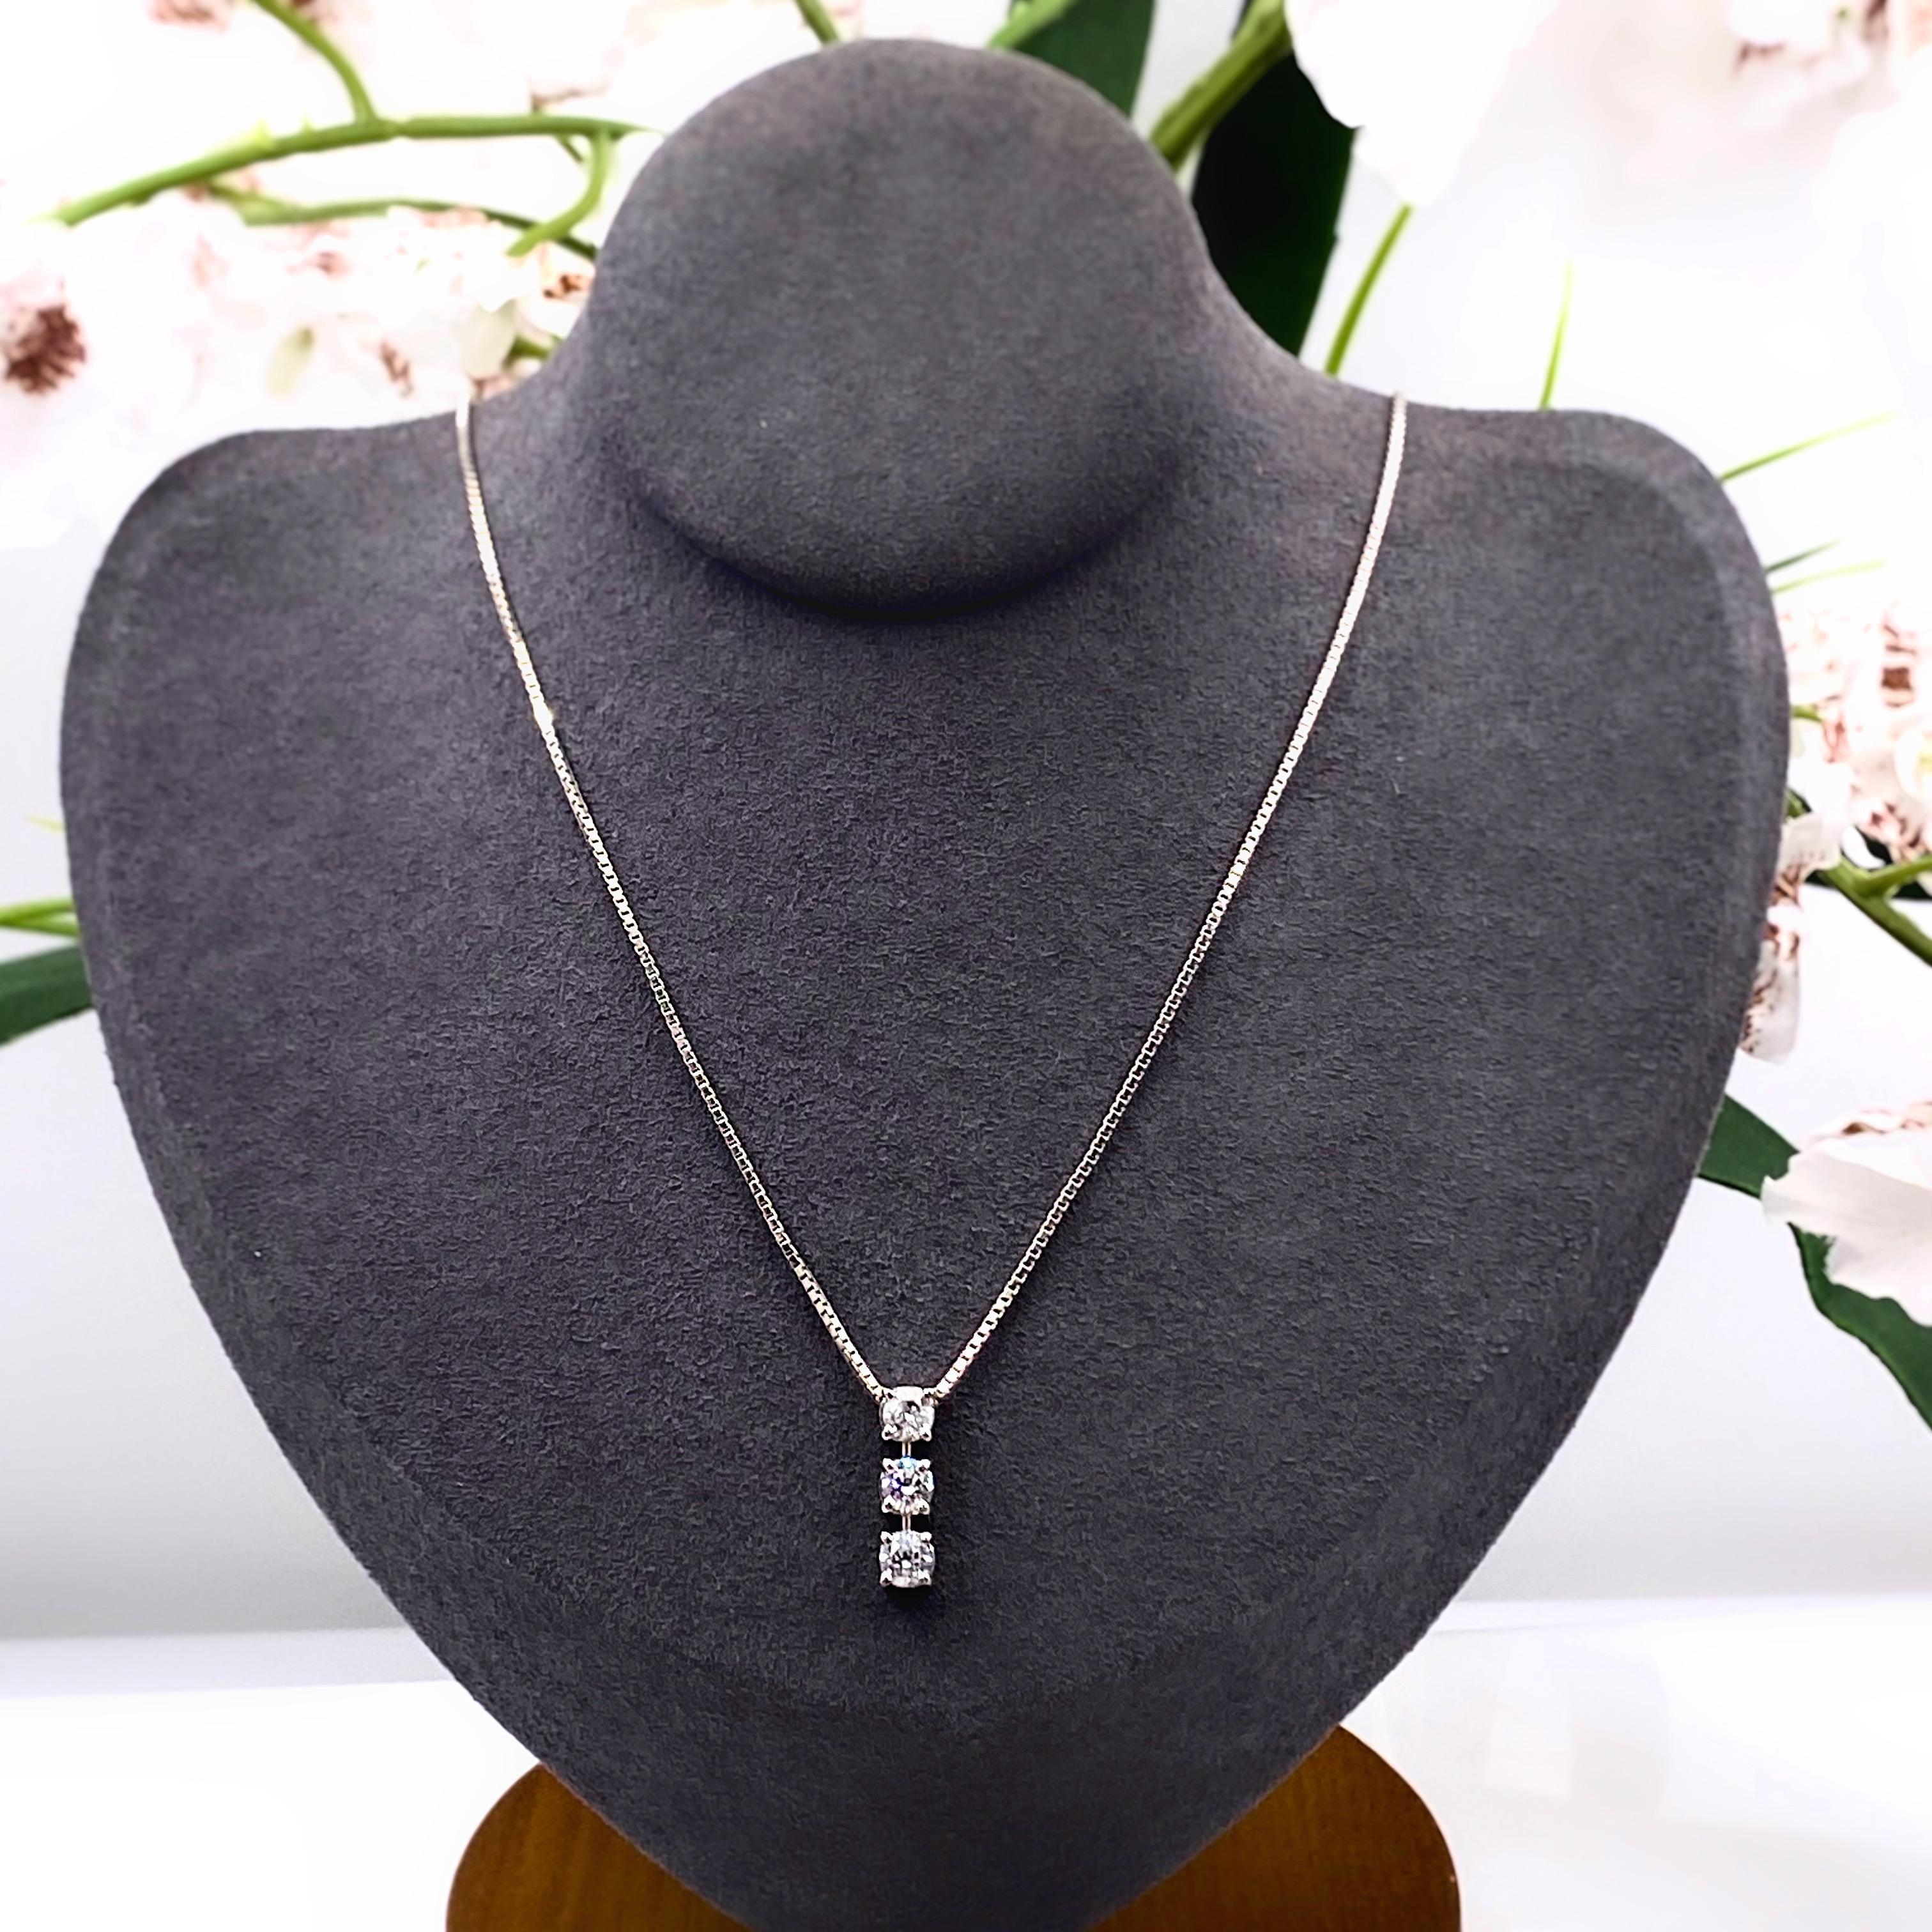 Round Diamond Three-Stone Pendant Necklace
Metal:  18kt White Gold
Length:  Chain 17.5 Inches
Pendant:  0.50 ( 1/2 ) Inches
TCW:  0.70 tcw
Main Diamond:  3 Round Brilliant Diamonds 0.19 cts - 0.23 cts - 0.28 cts
Color & Clarity: G - H / SI1 -